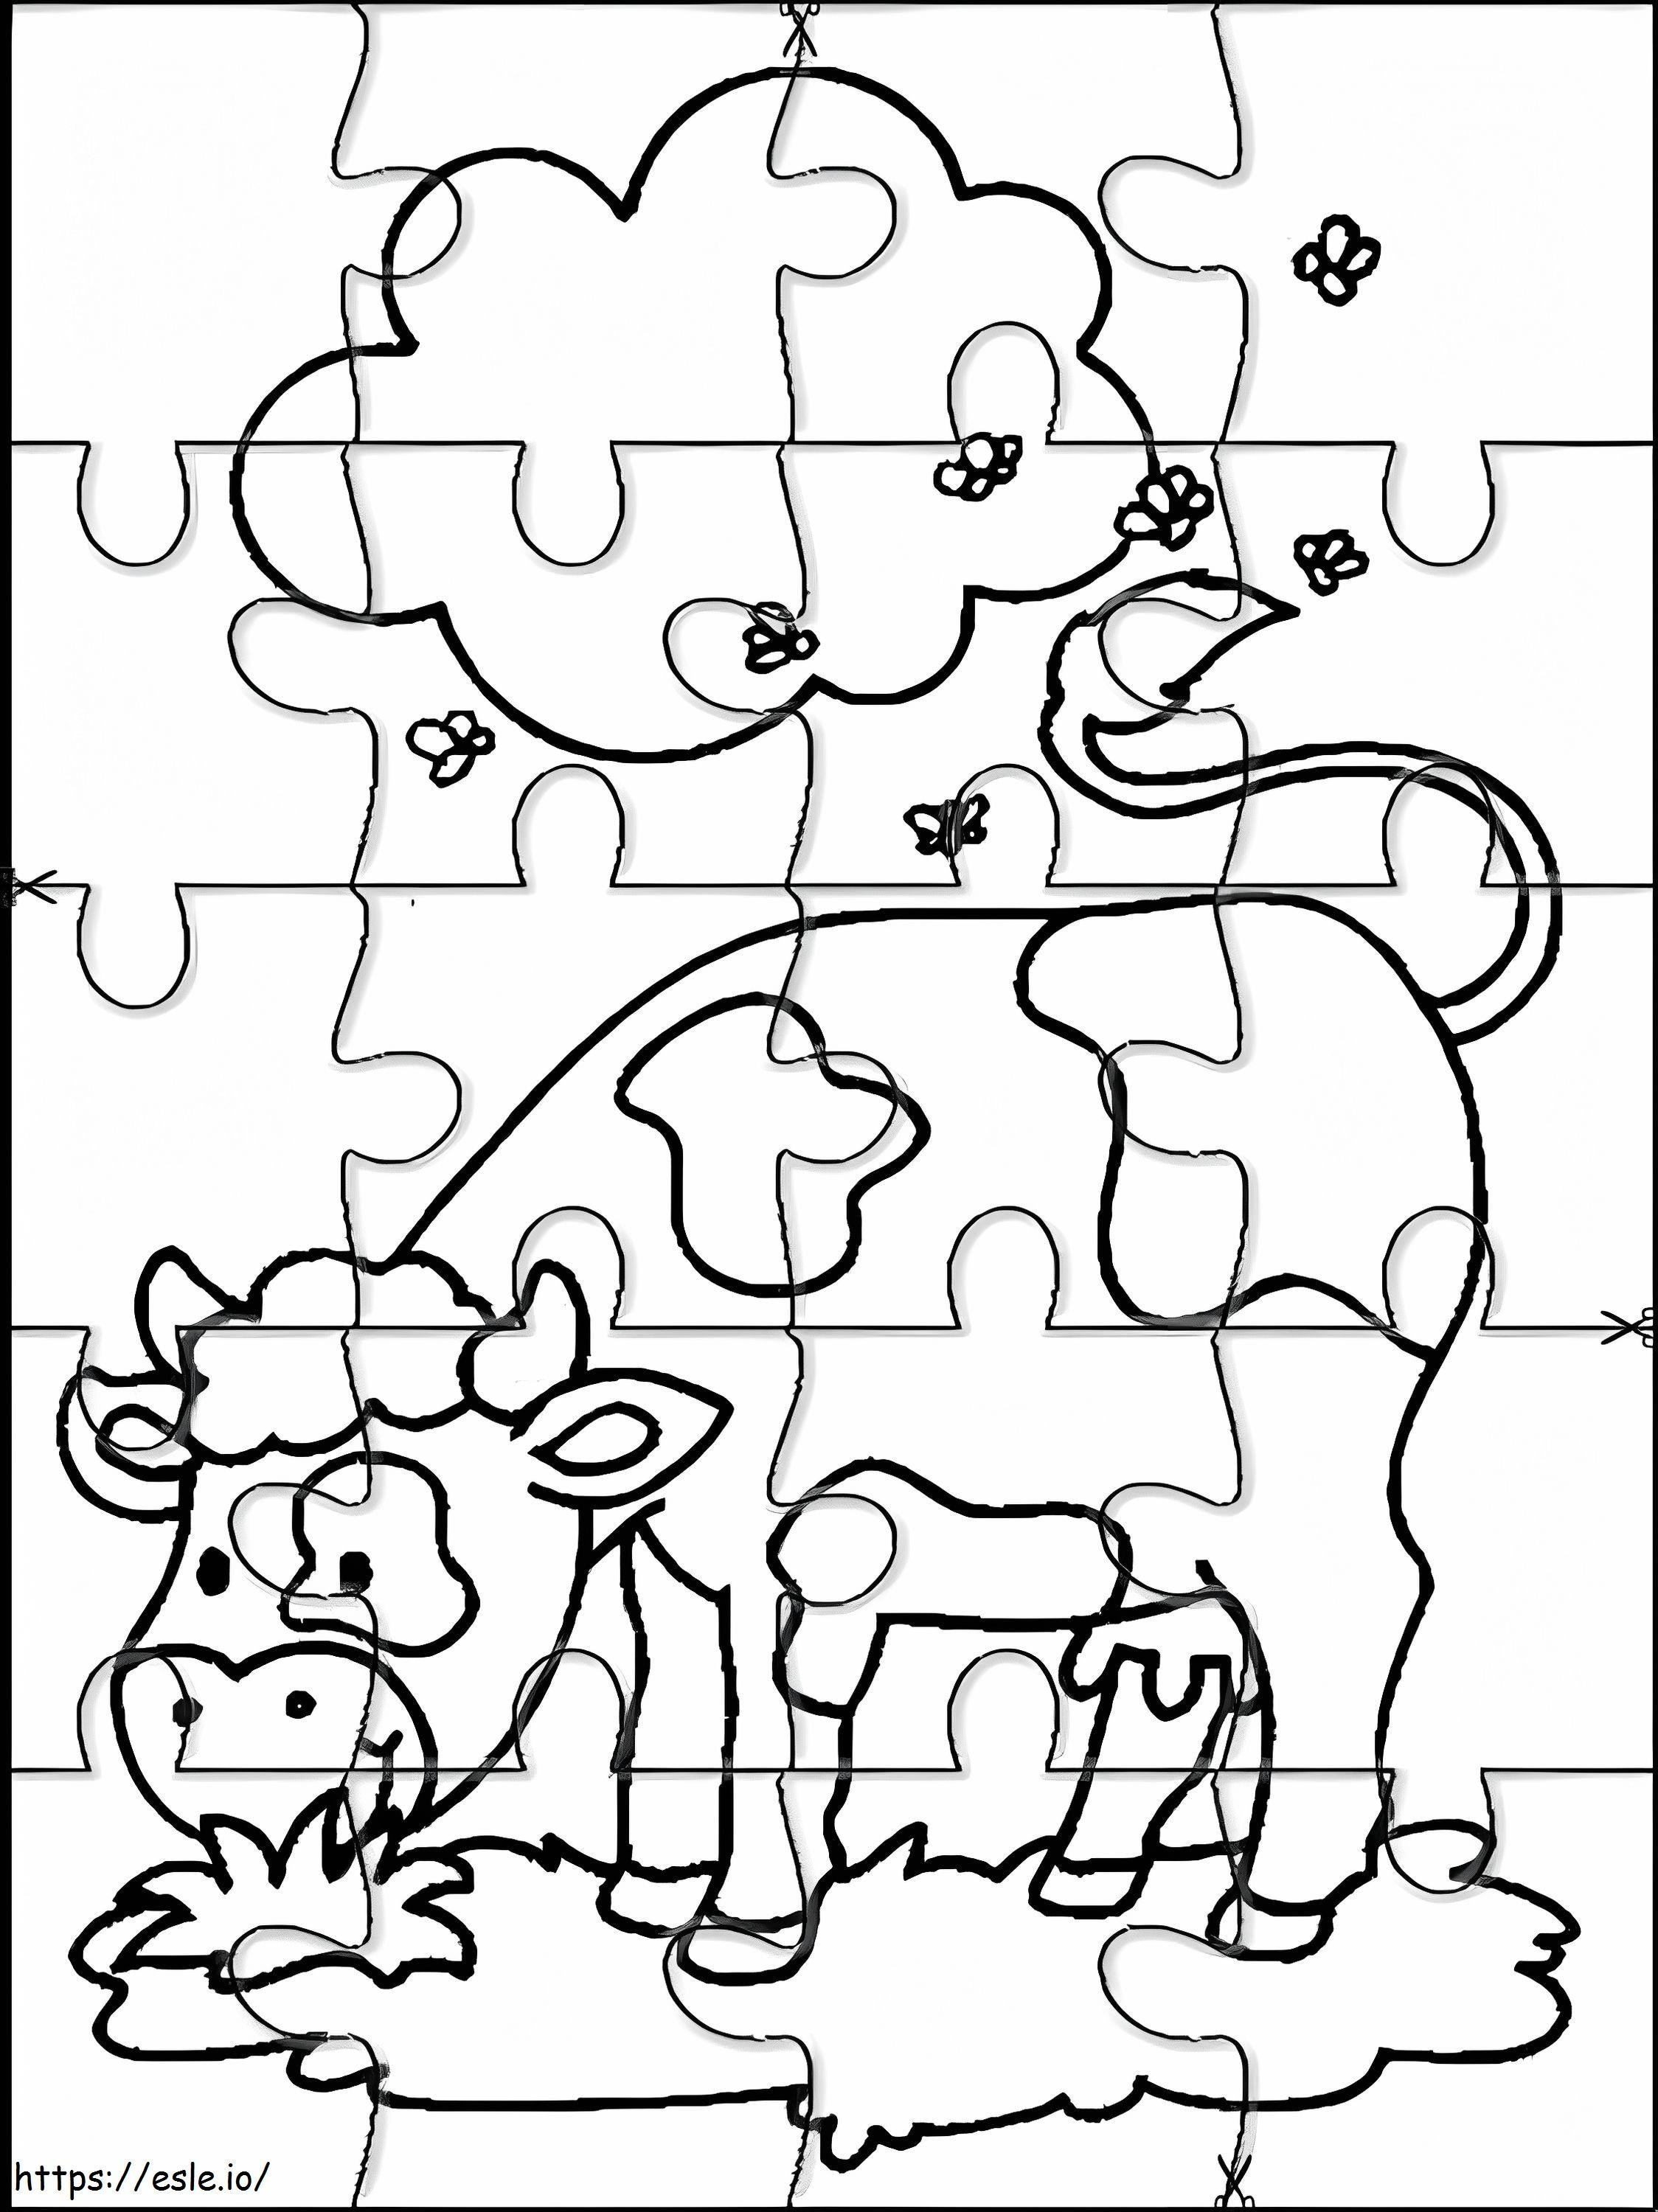 Cow Jigsaw Puzzle coloring page